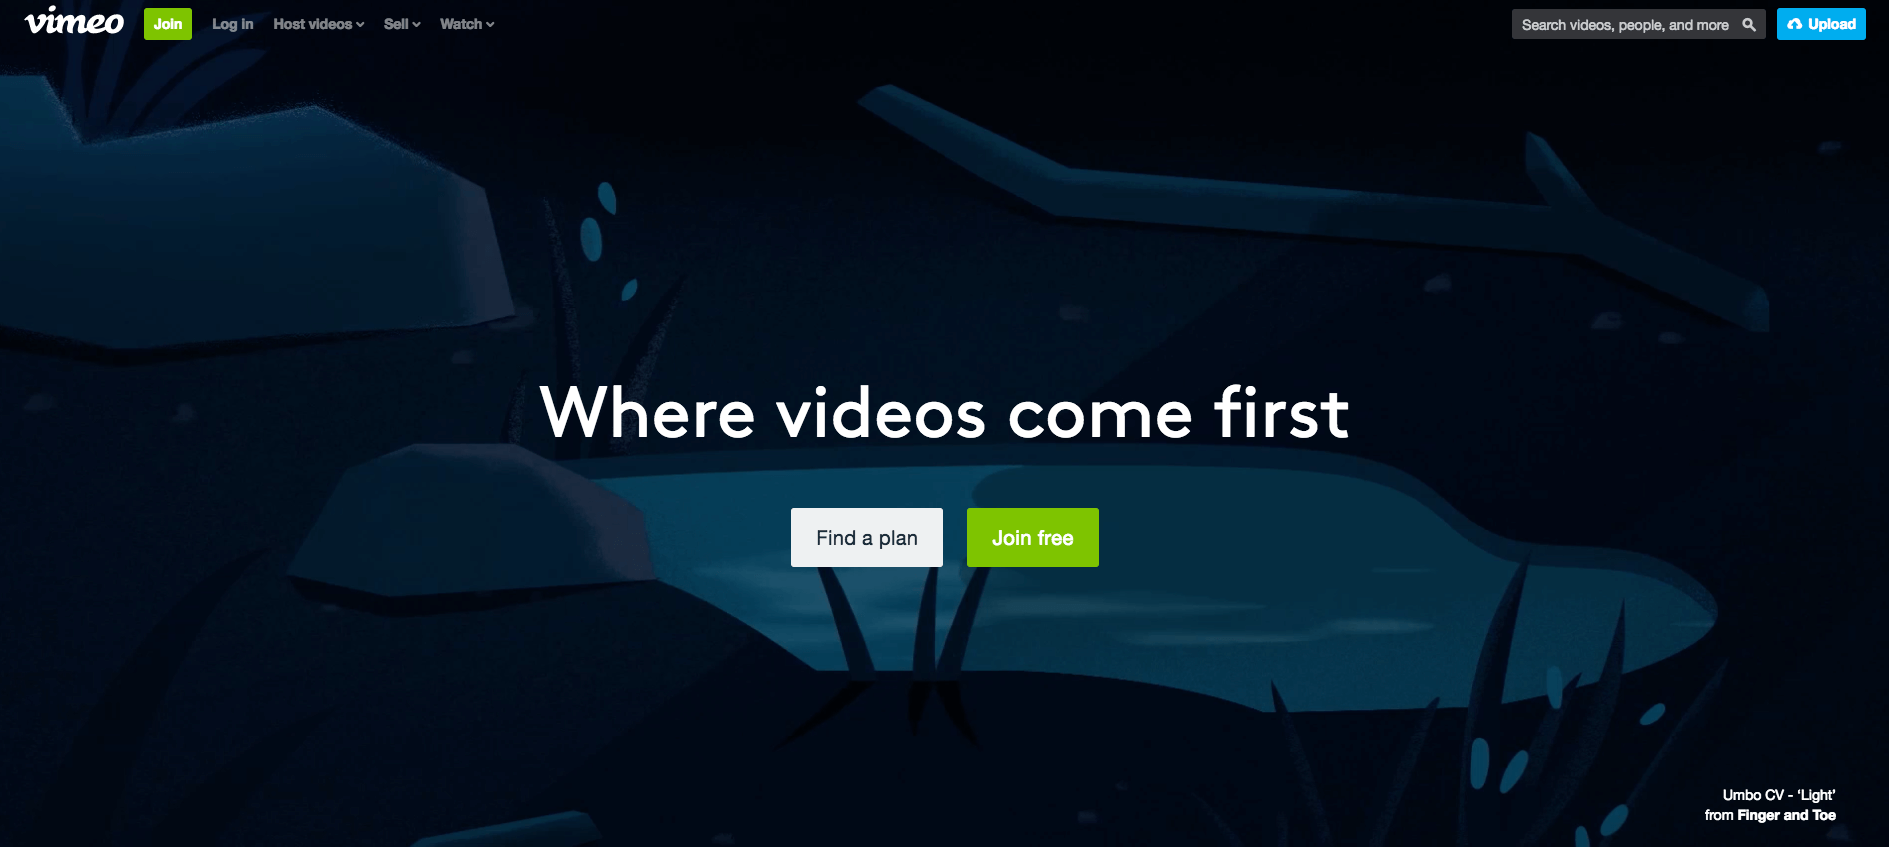 Join the Community of 10,000,000 Creators